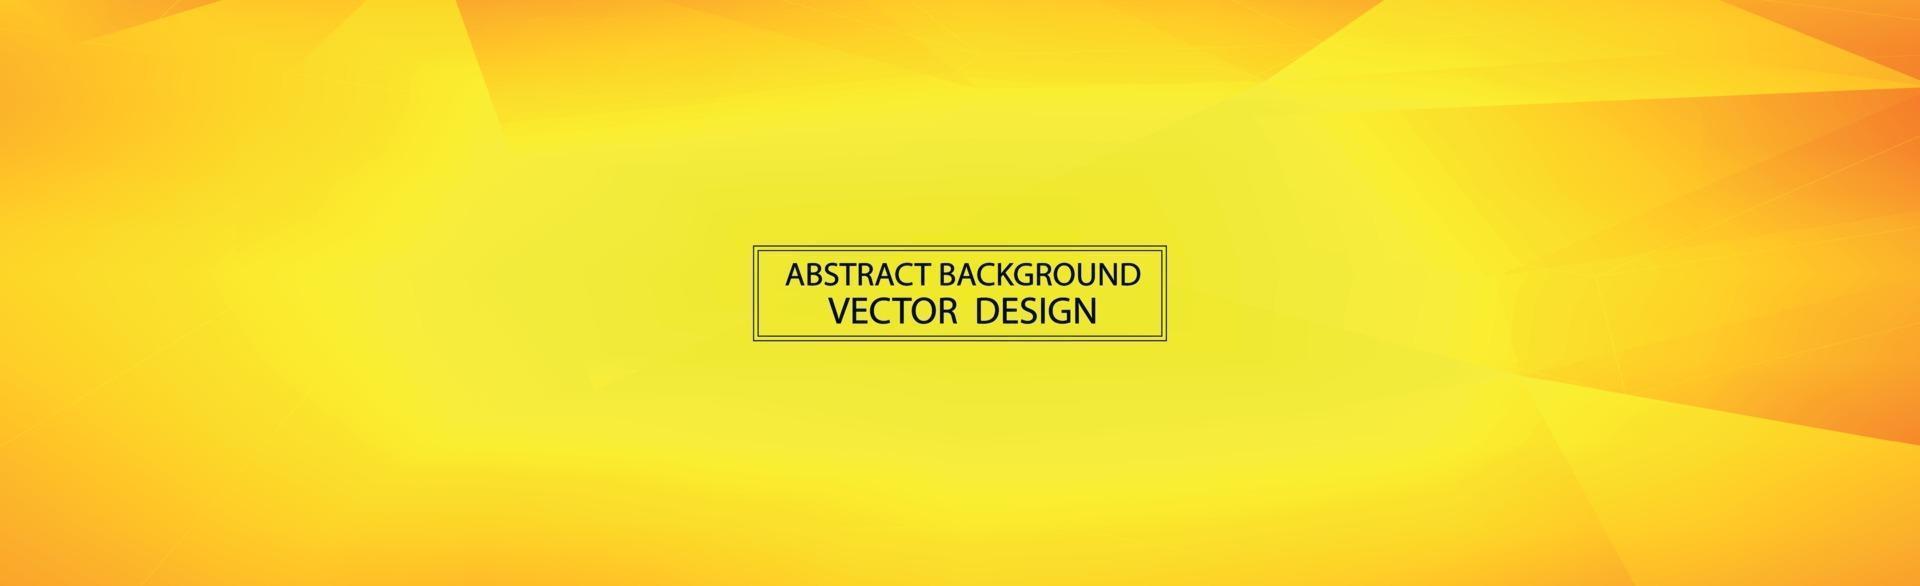 Yellow - Orange Panoramic Background with Triangles - Vector